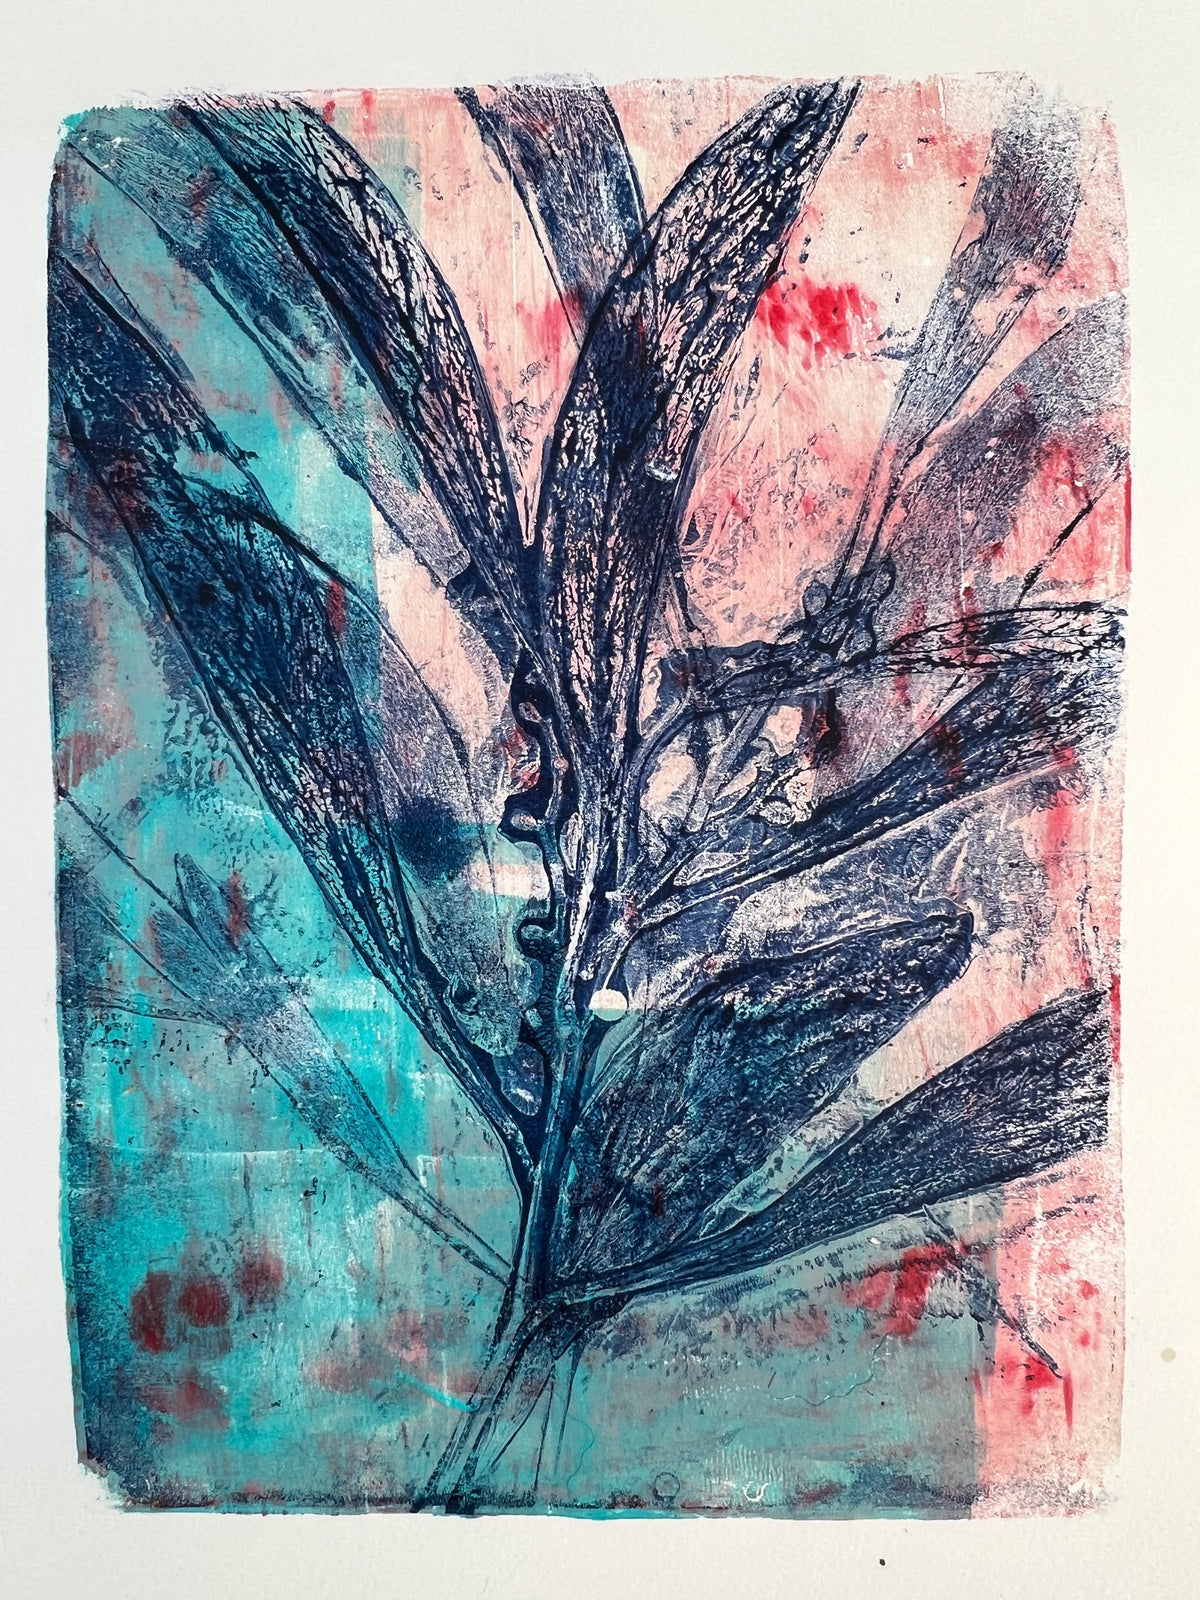 Gelli Print Play - 9 March Monoprinting with Gel Plates (Workshop in West Ryde)